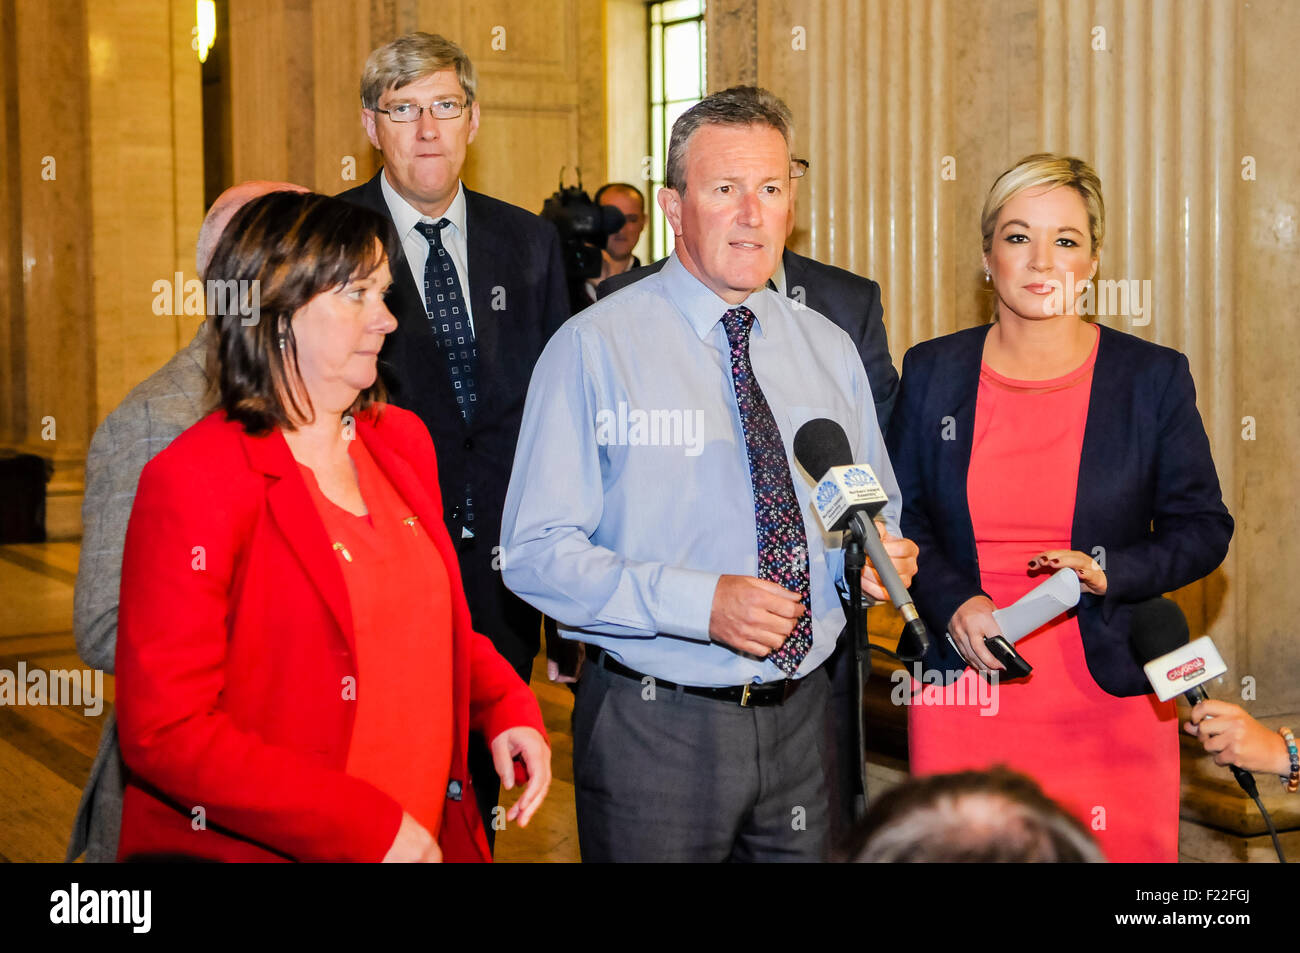 Belfast, Northern Ireland, UK. 10th September, 2015.  Conor Murphy from Sinn Fein calls on other political parties not to adjourn or suspend the Northern Ireland Assembly. Credit:  Stephen Barnes/Alamy Live News. Stock Photo